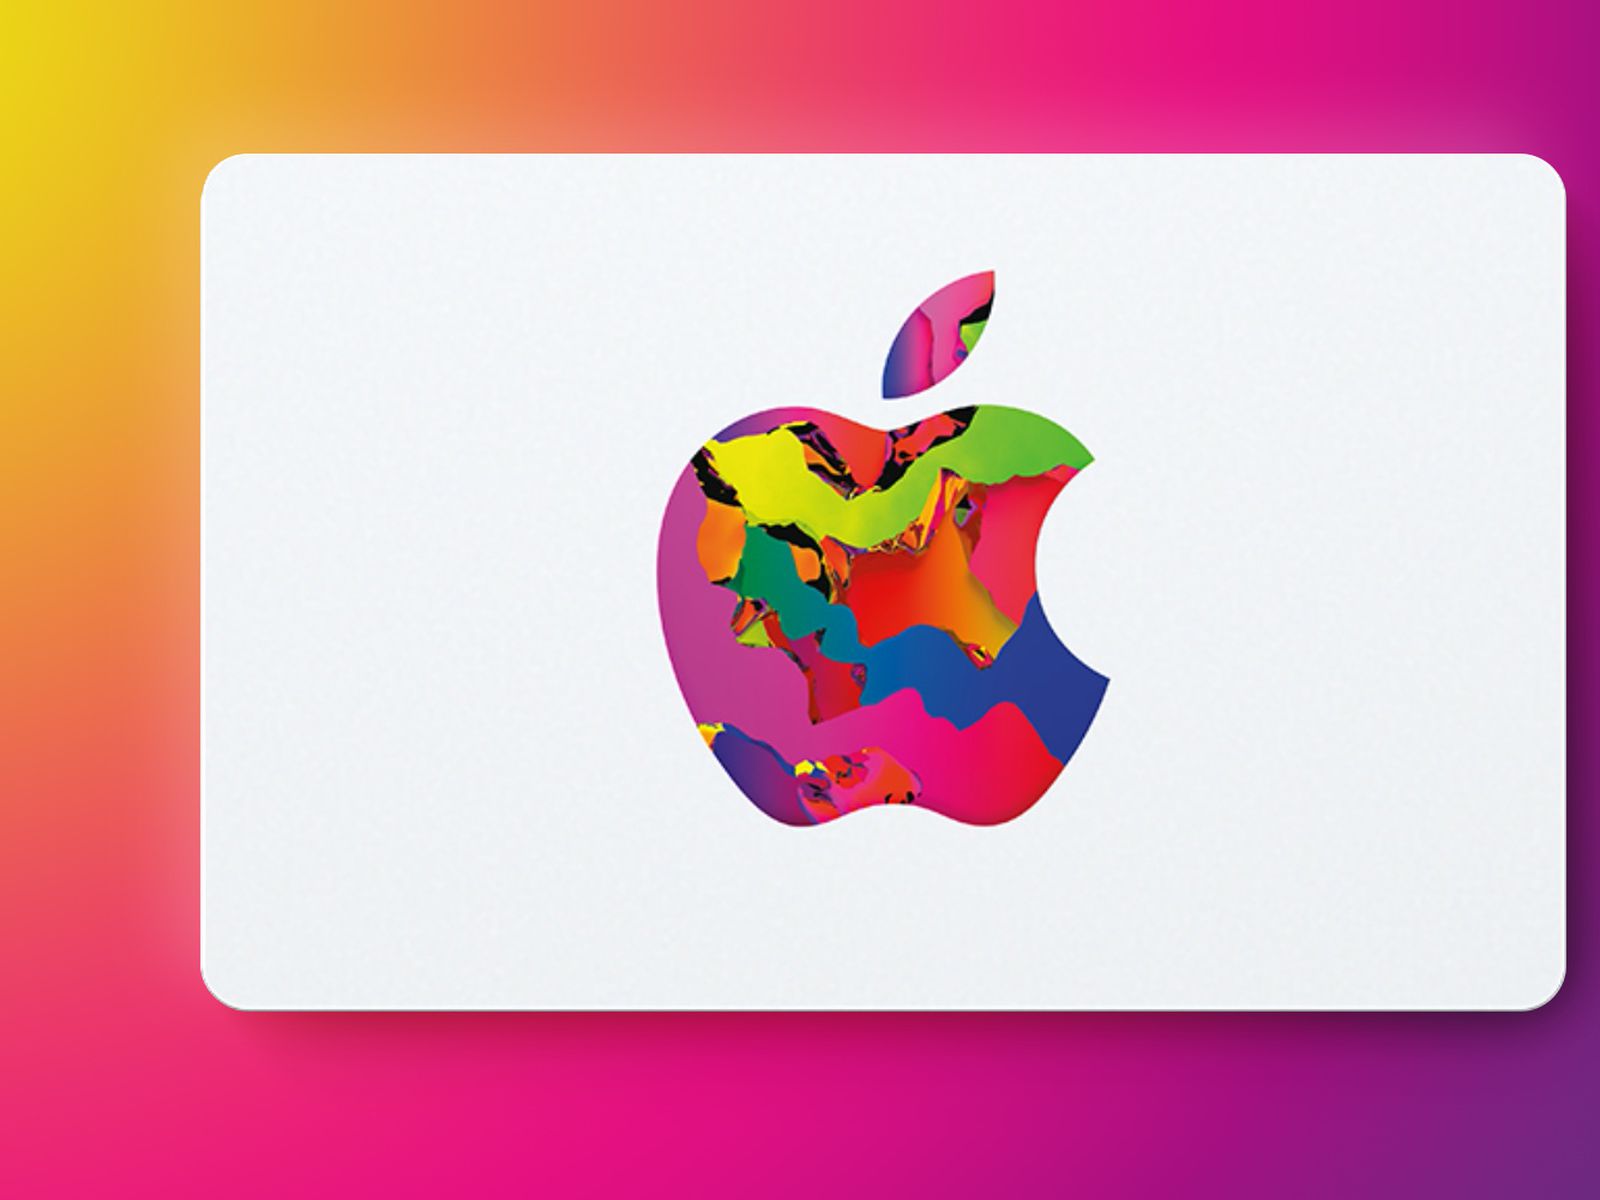 Apple Gift Card Images – Browse 10,515 Stock Photos, Vectors, and